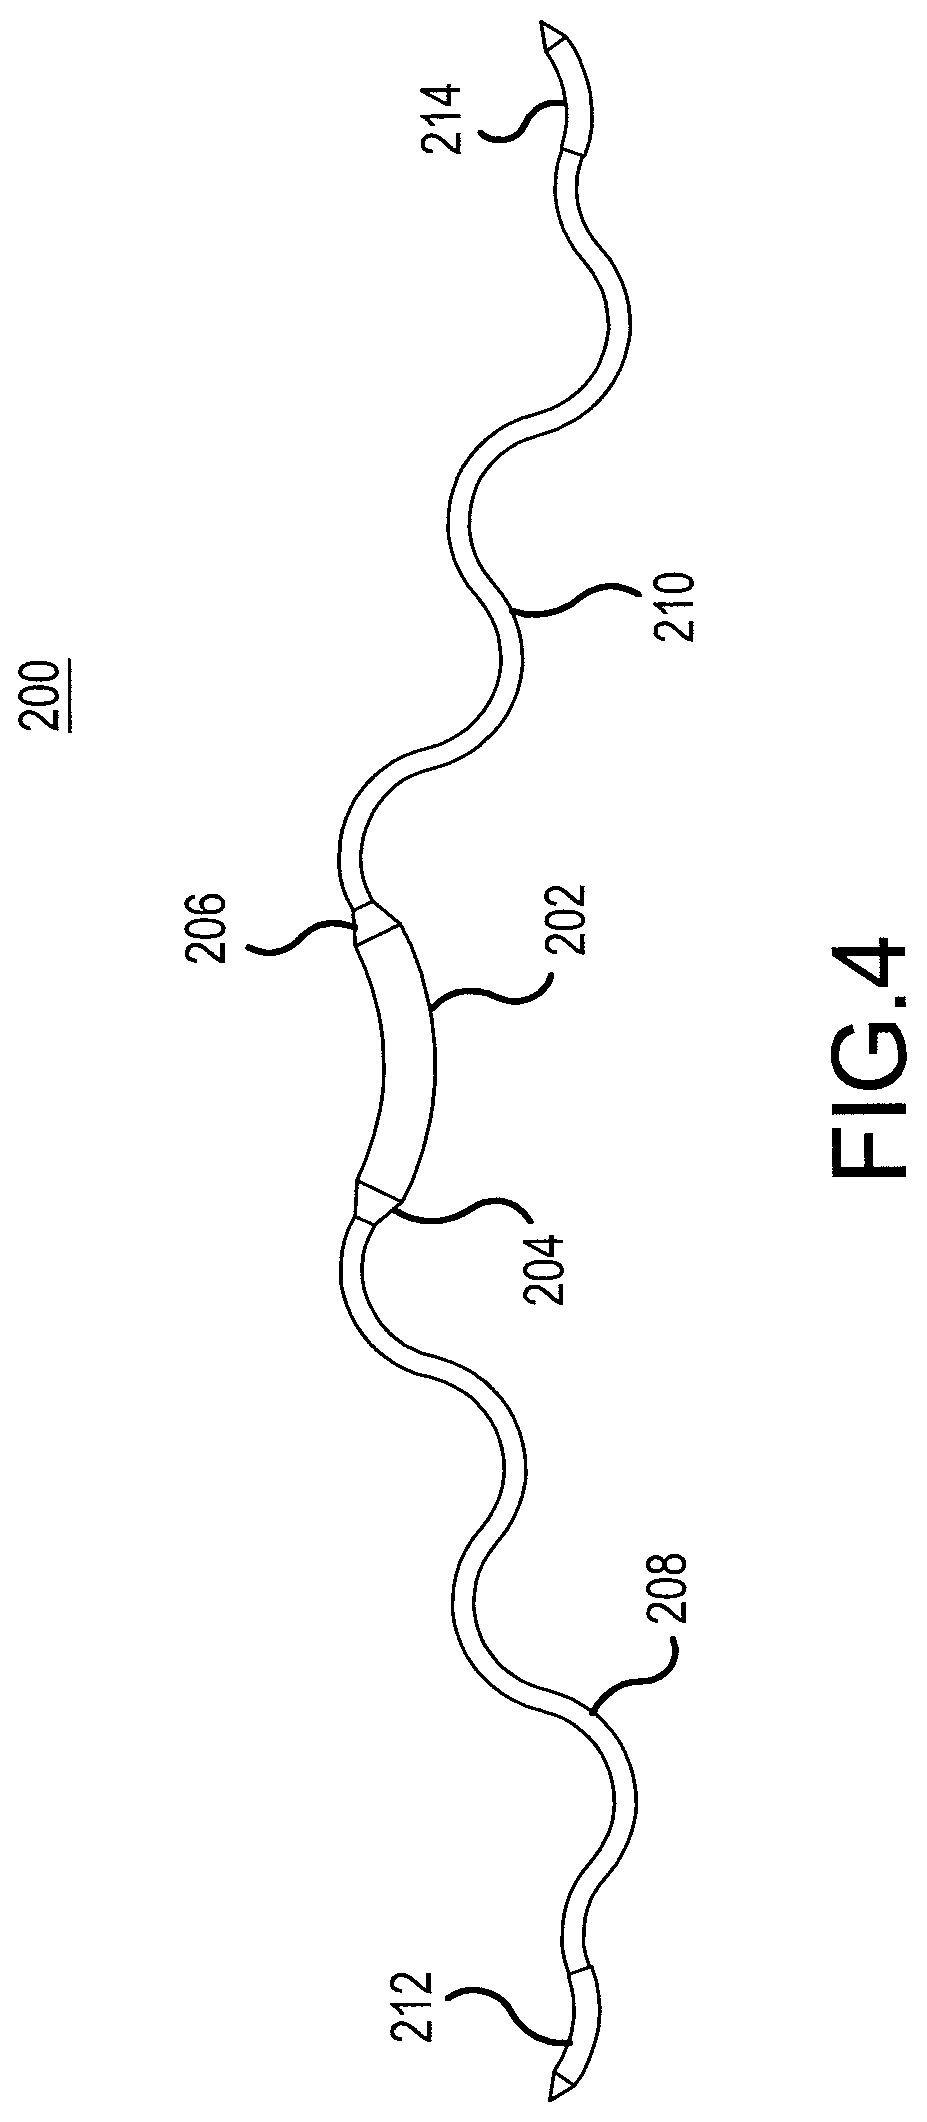 Surgical medical suture needle with surgical suture and anchor system